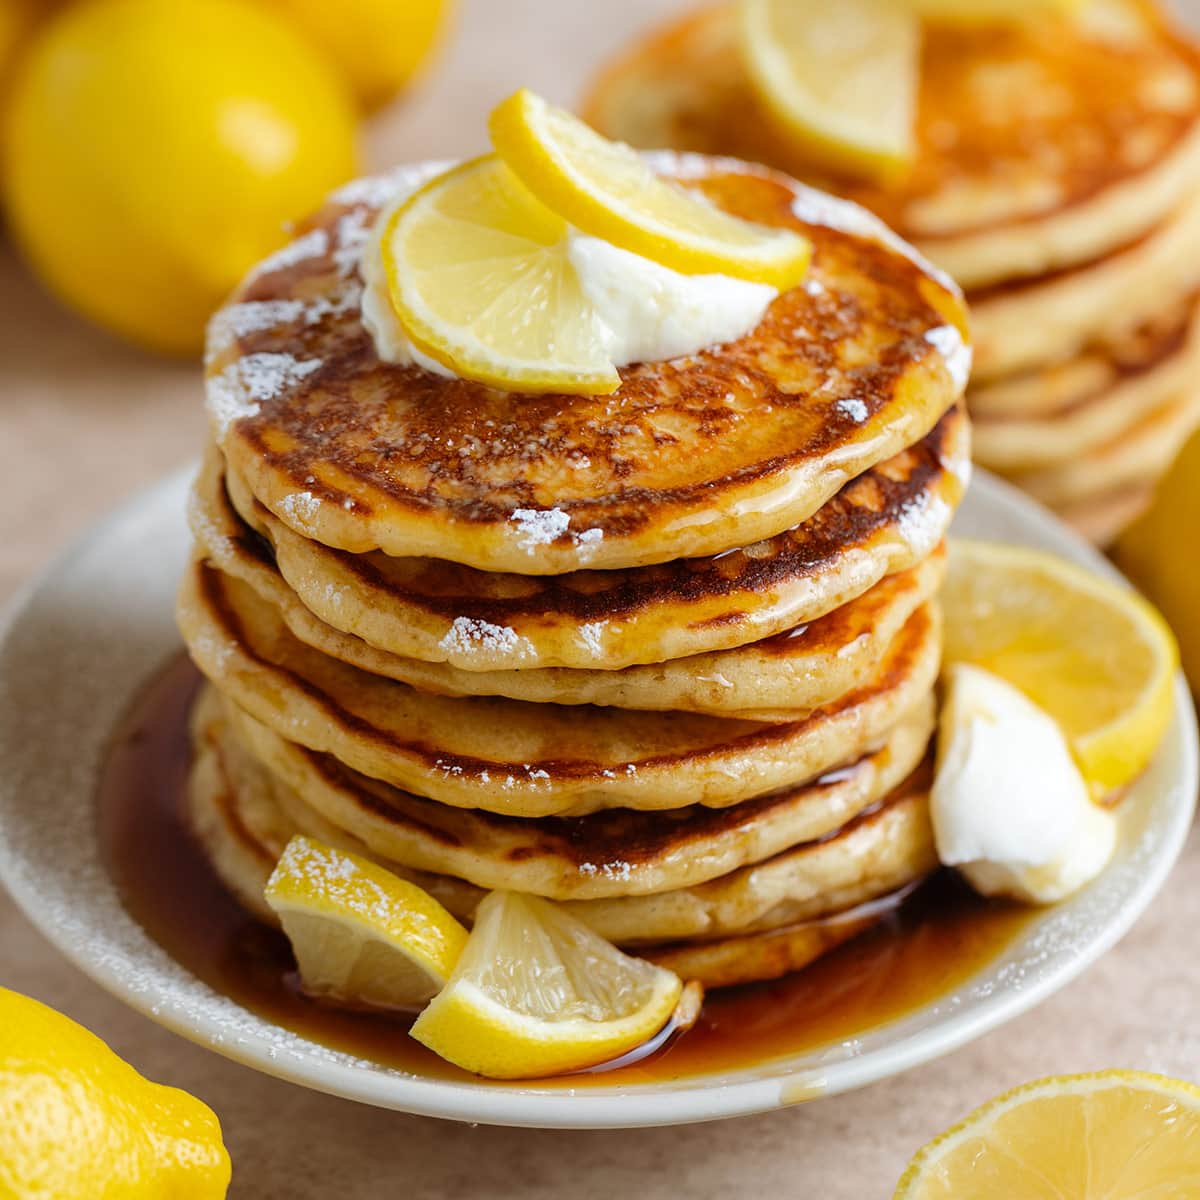 These Lemon Pancakes are light, fluffy, and packed with bright lemon flavor without being tart. They're freezer-friendly and great for meal prep! #lemonpancakes thehealthfulideas.com/lemon-pancakes…